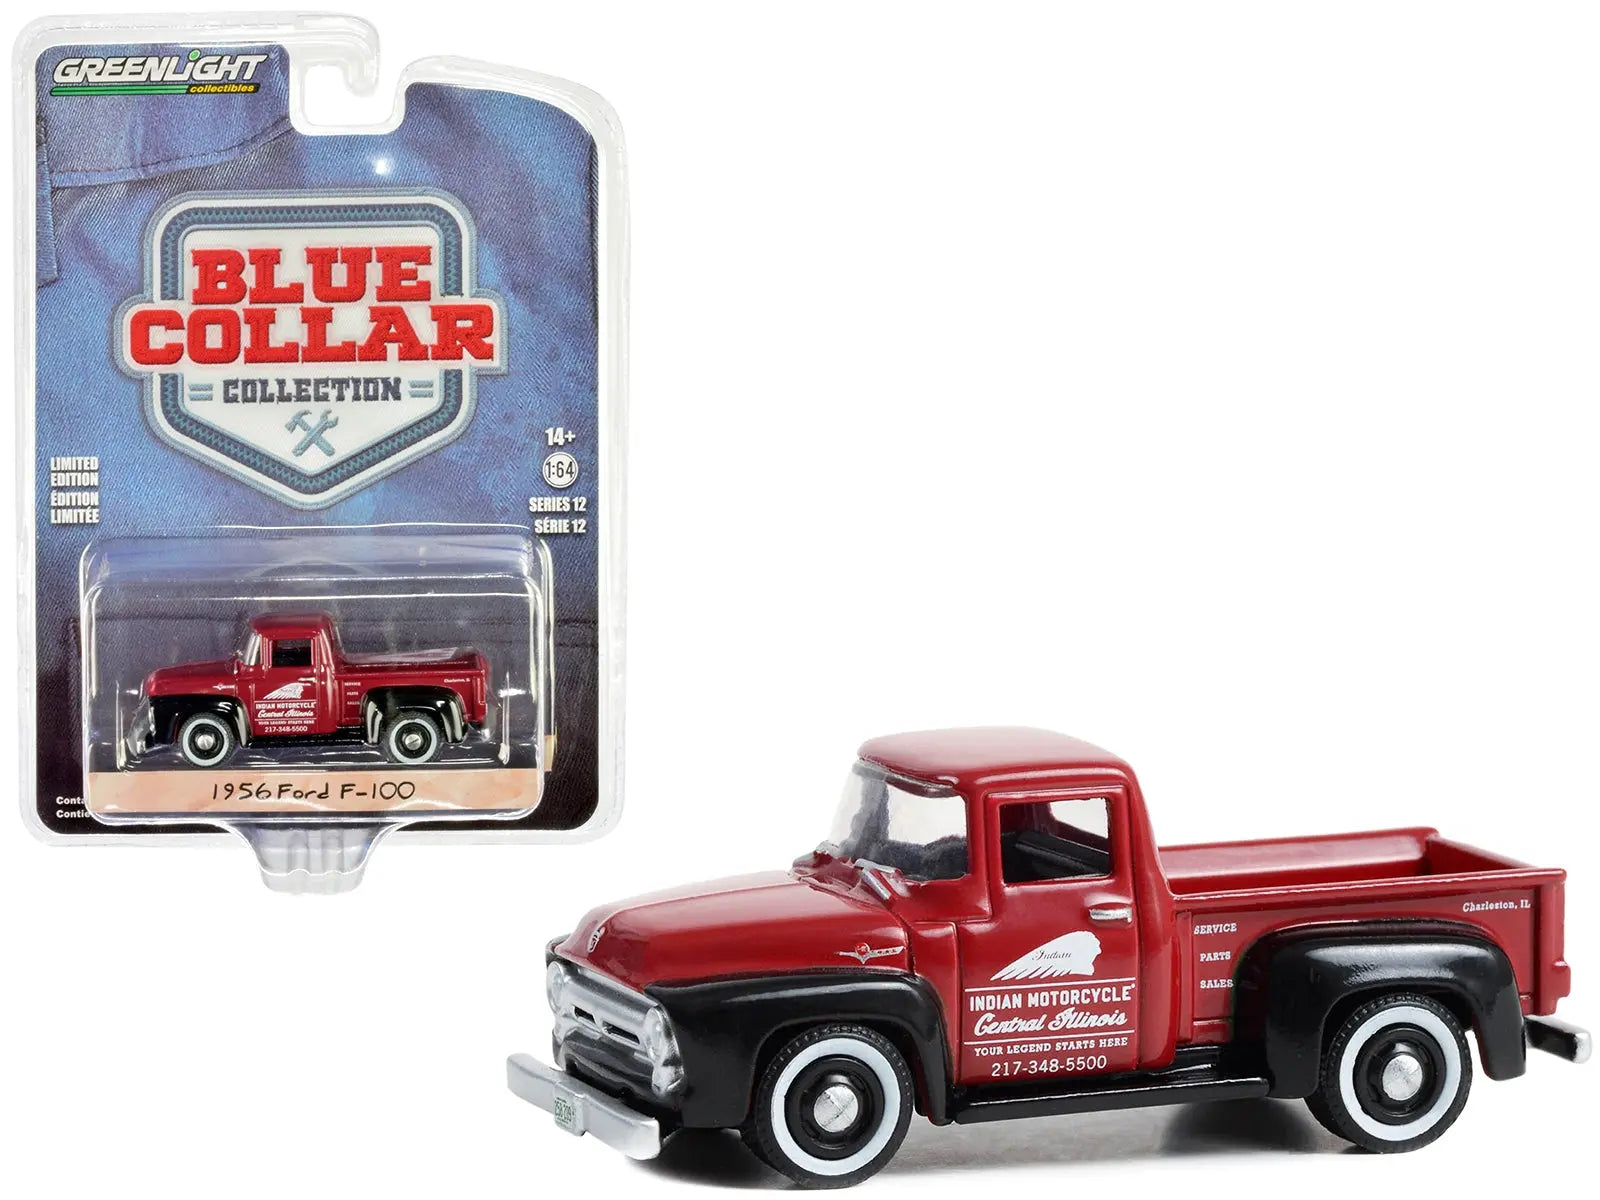 1956 Ford F-100 Pickup Truck Red and Black "Indian Motorcycle Service Parts & Sales" "Blue Collar Collection" Series 12  1/64 Diecast Model Car by Greenlight Greenlight